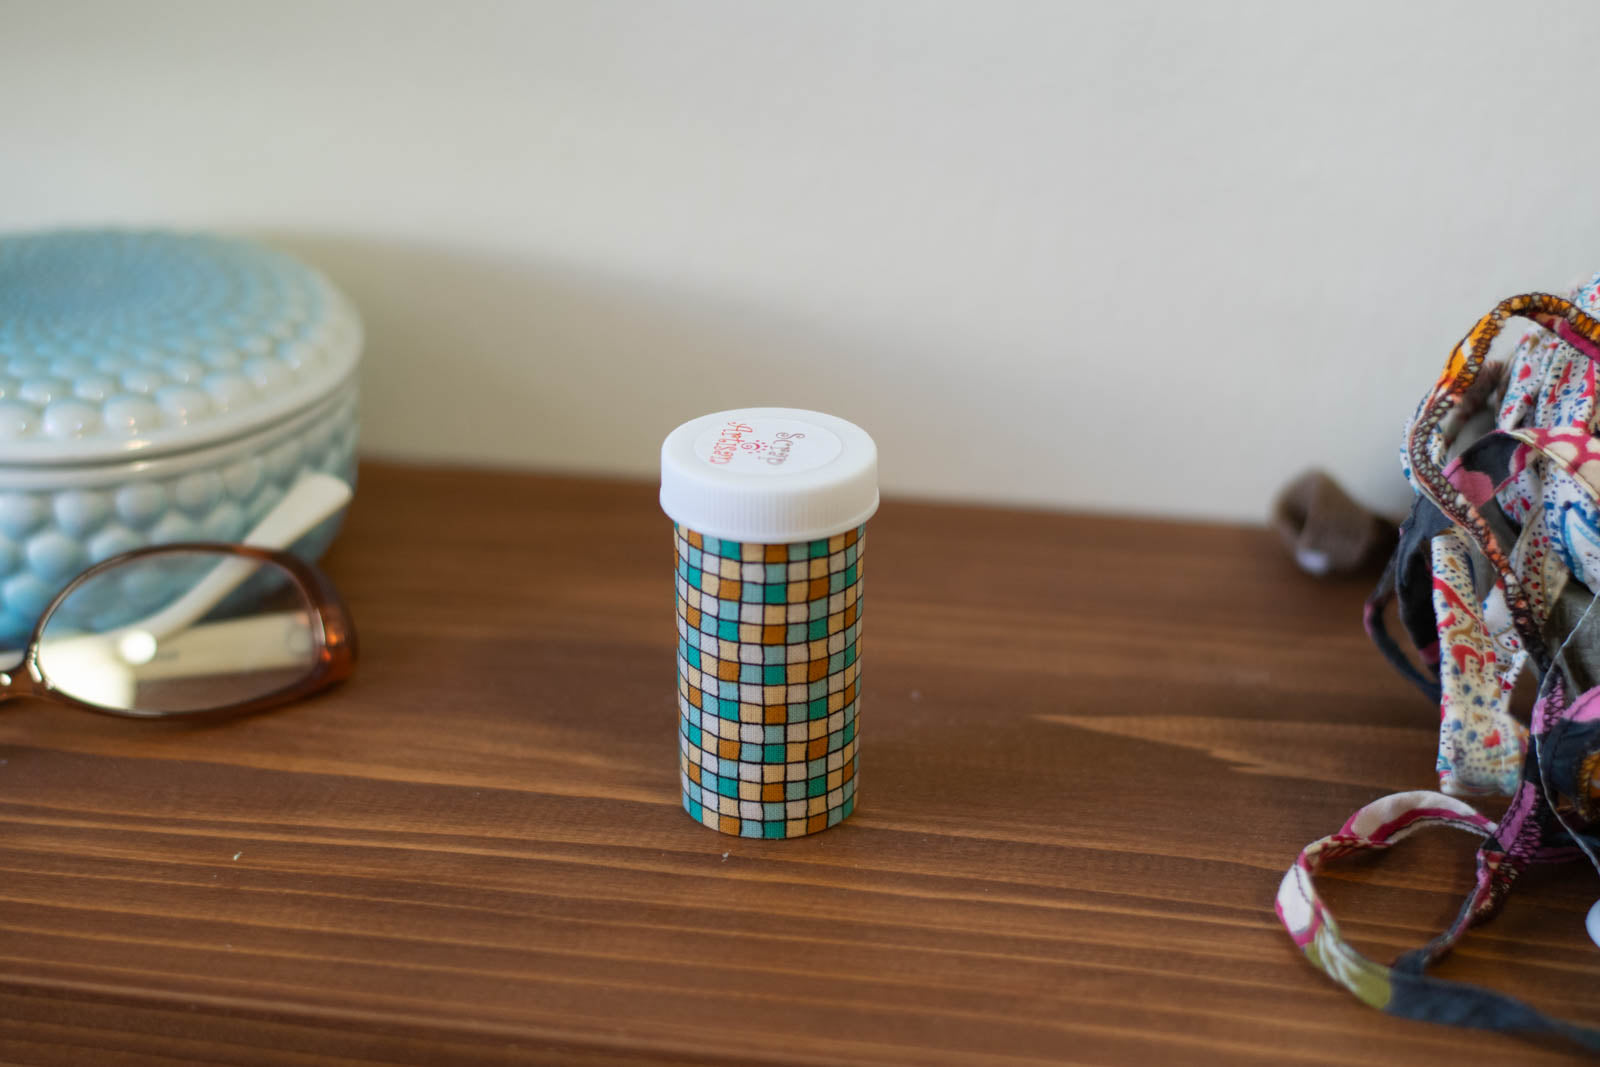 upcycled prescription bottle sewing kit — green and ochre tiles, closed, 2.75" high